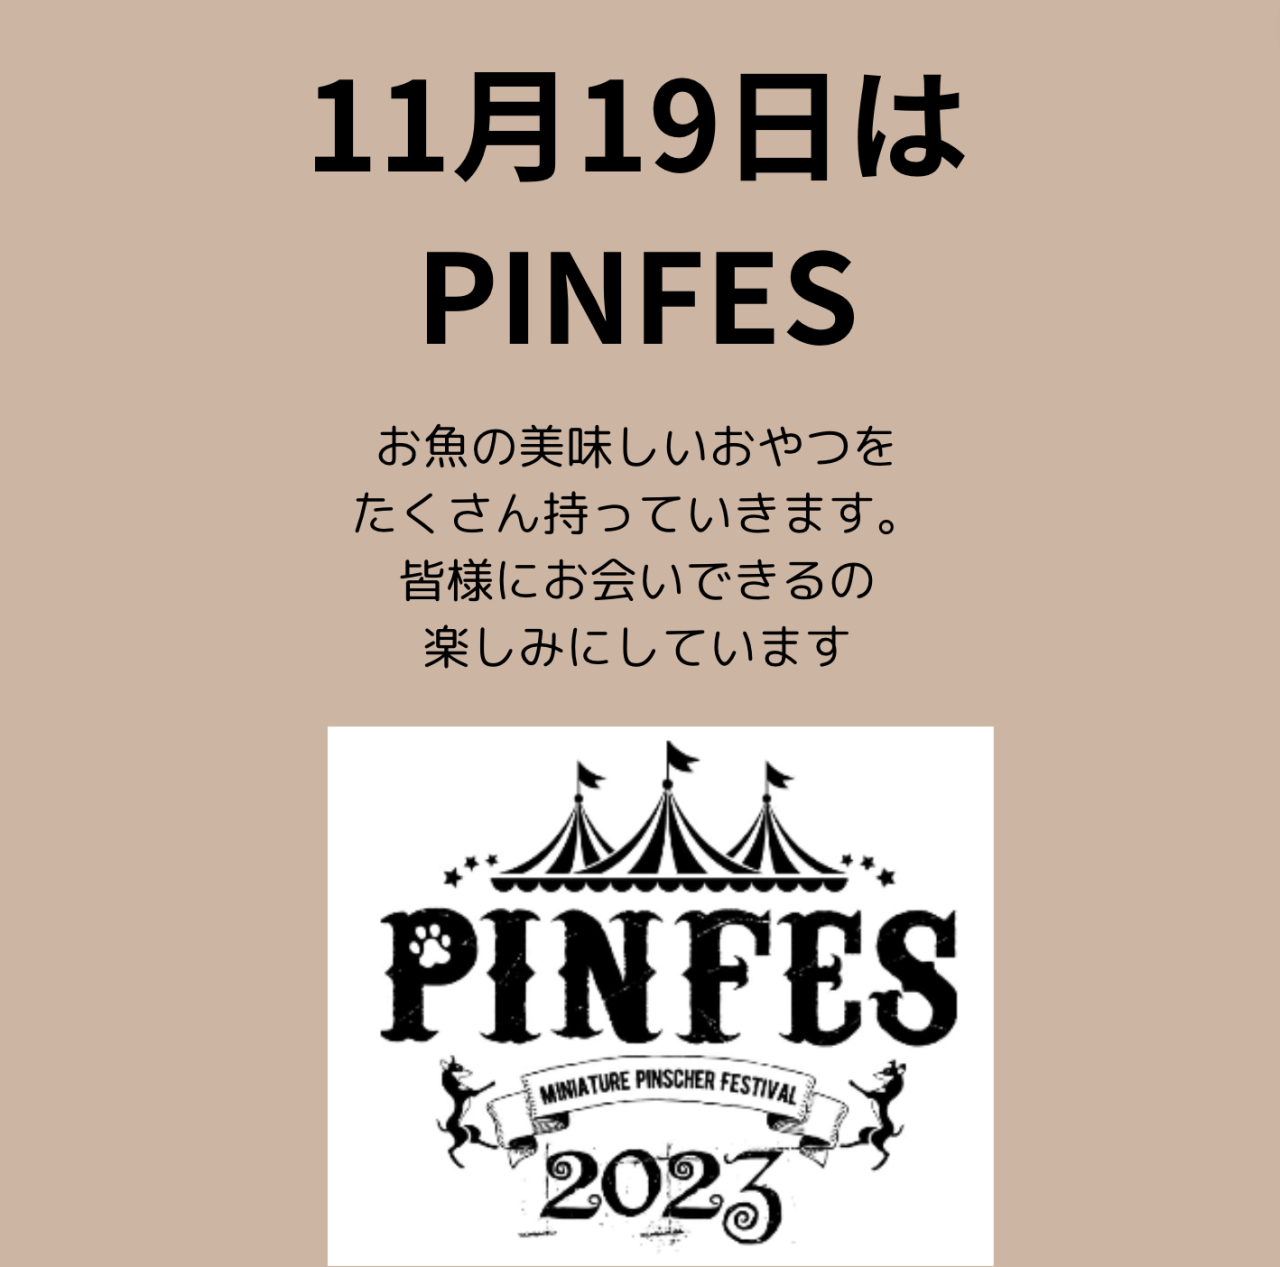 PINFES